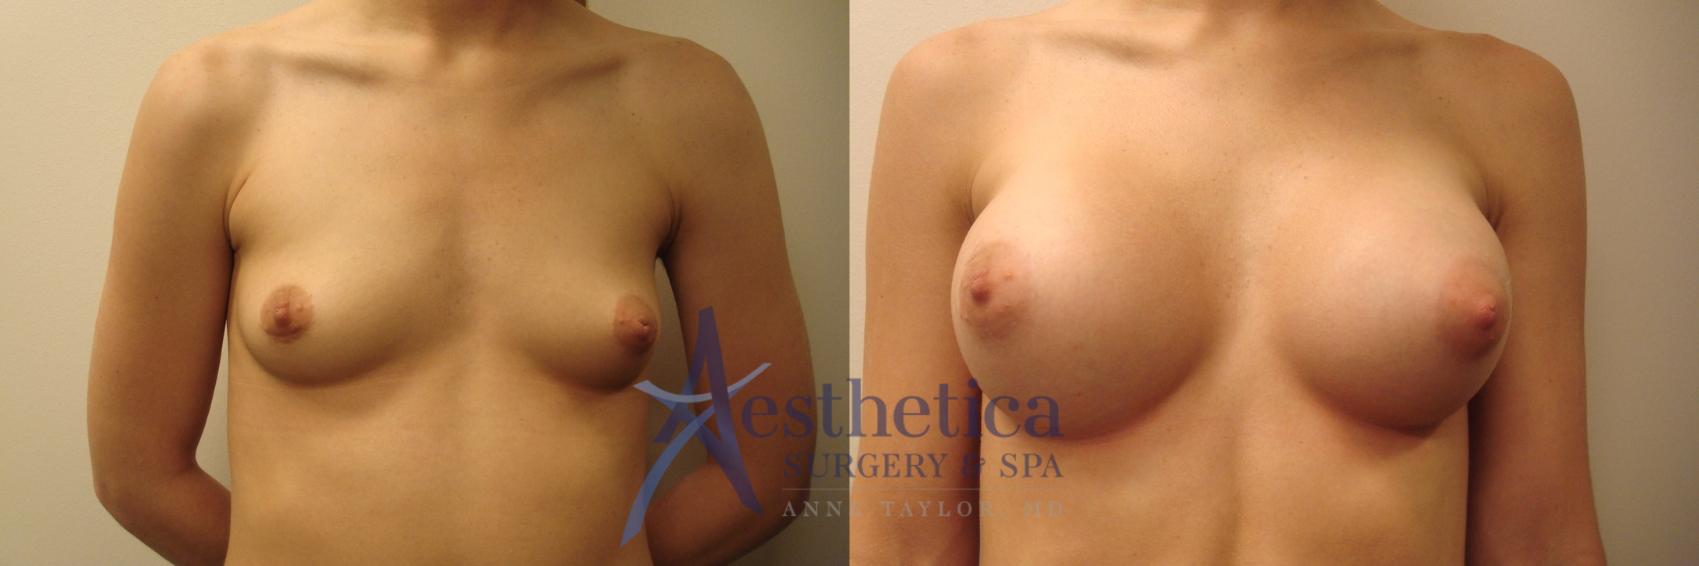 Breast Augmentation Case 506 Before & After Front | Worthington, OH | Aesthetica Surgery & Spa